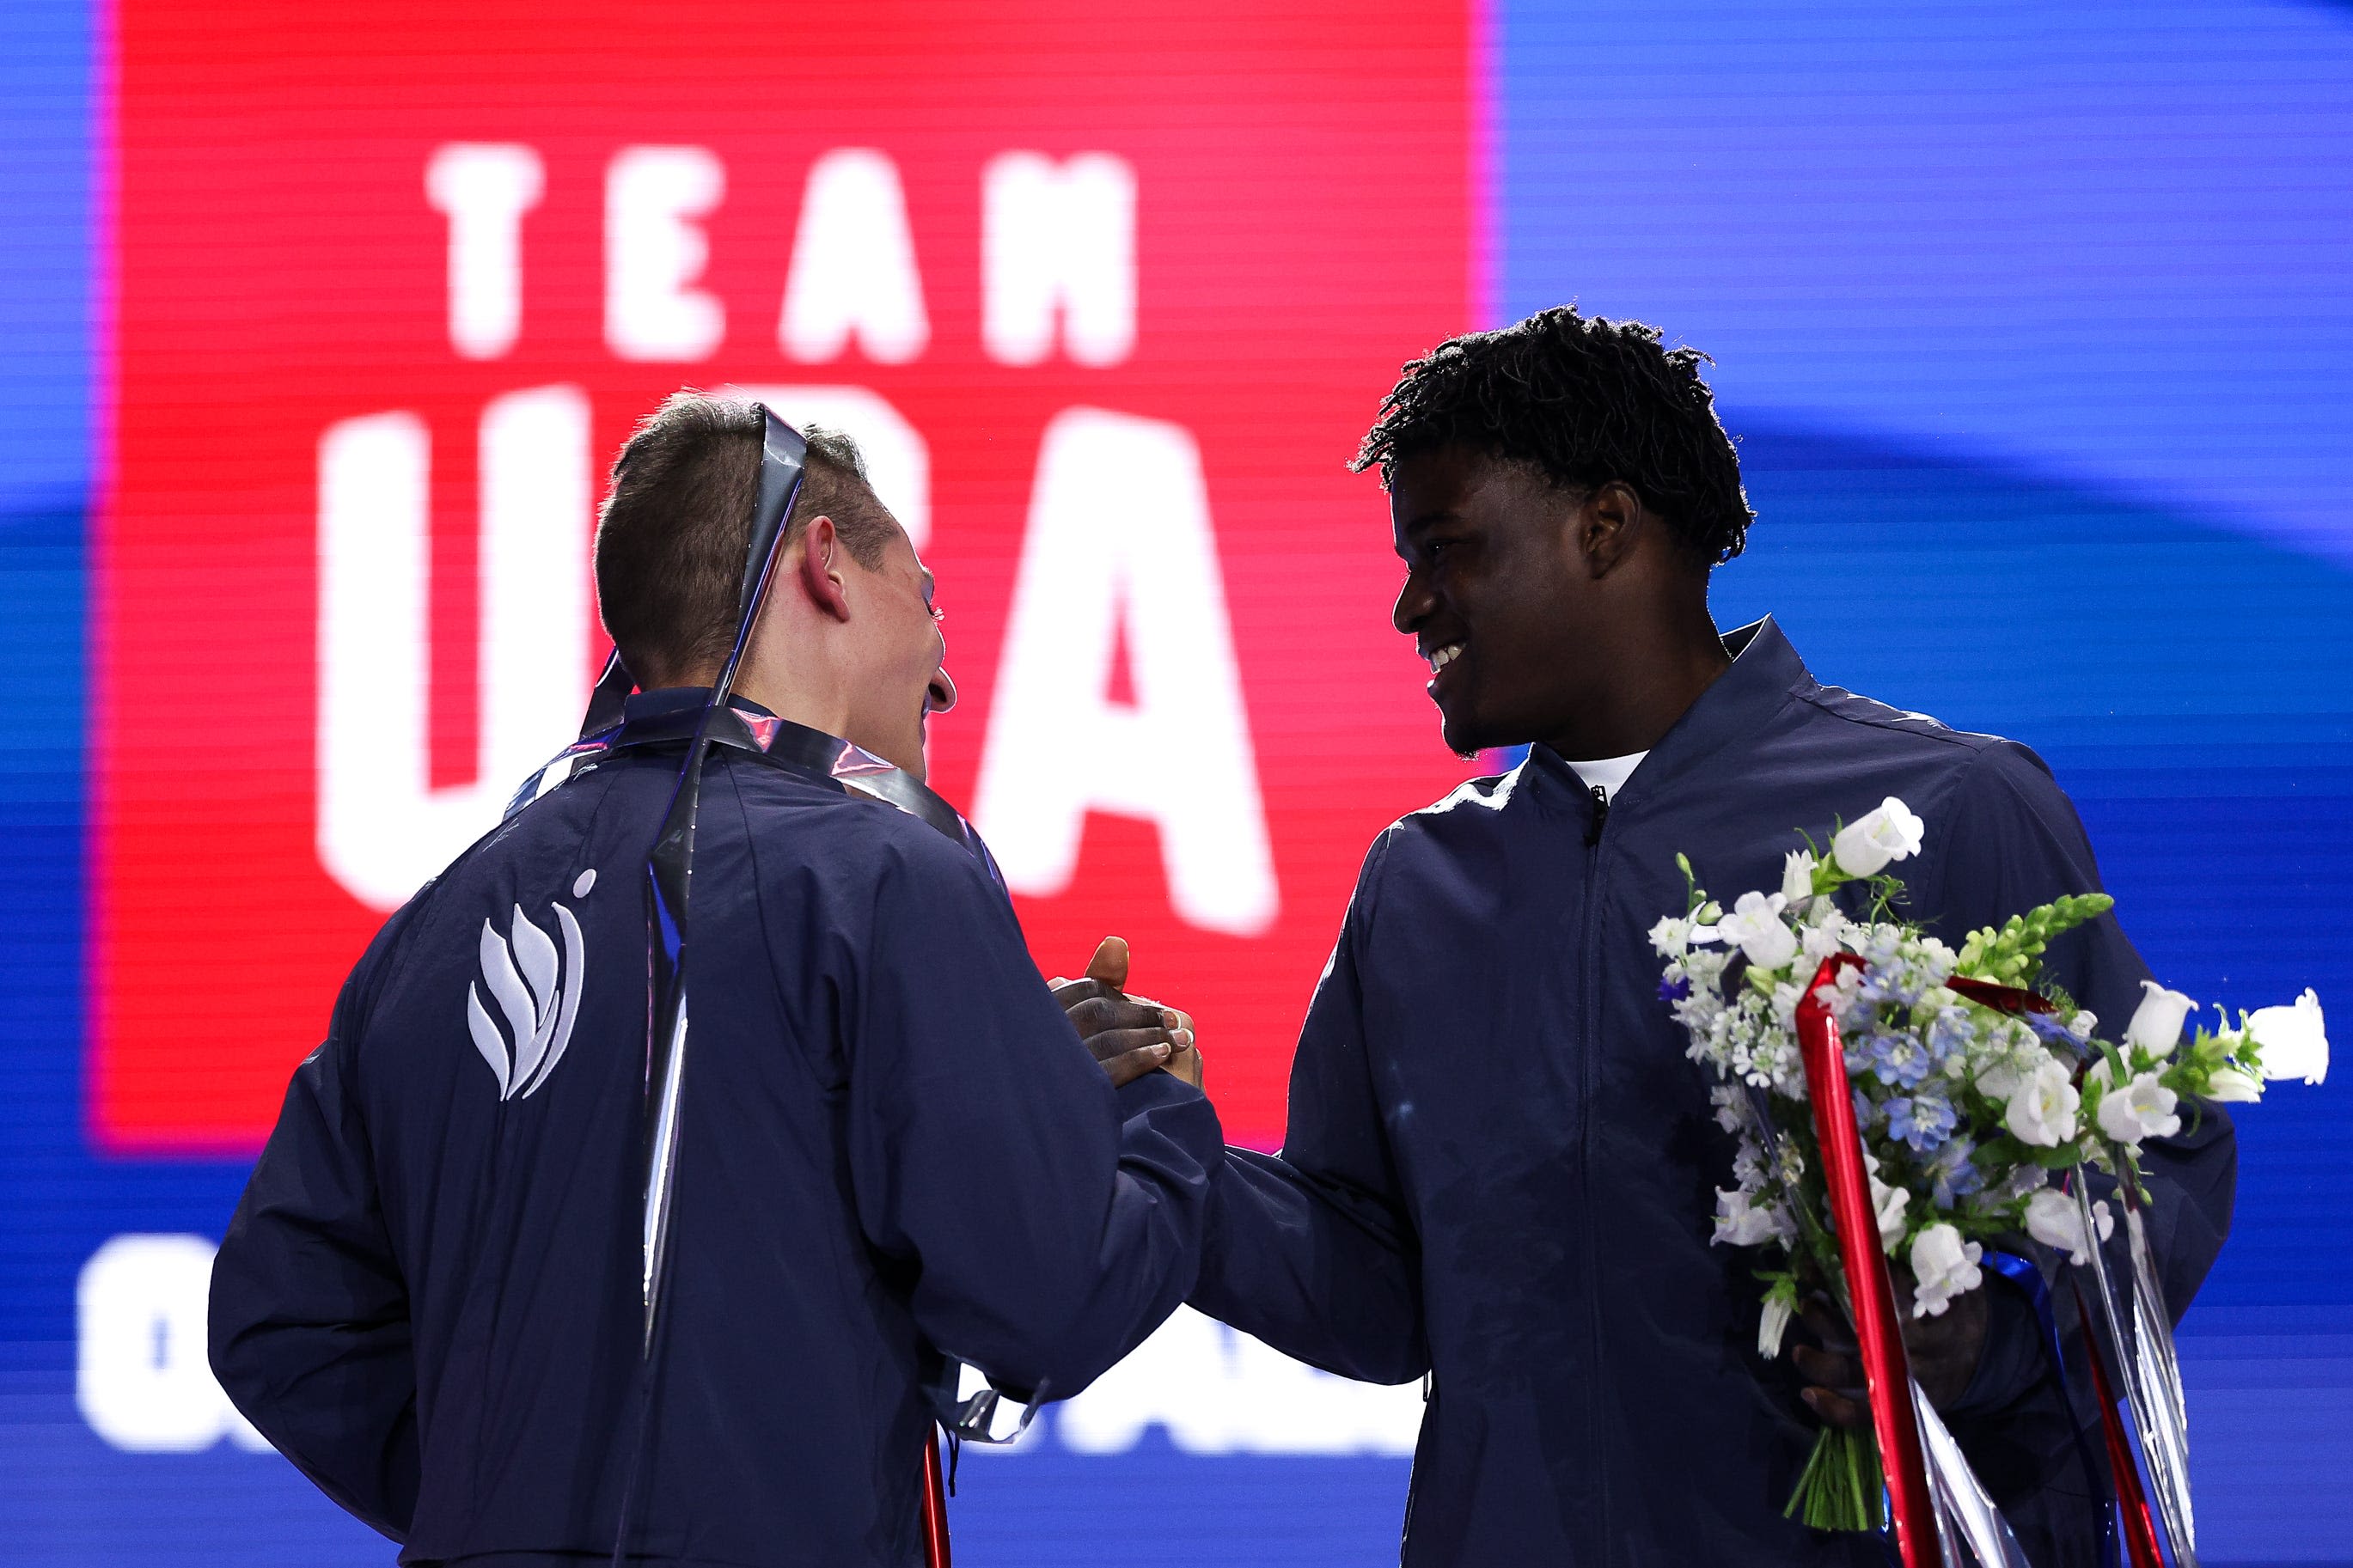 University of Michigan gymnasts Frederick Richard, Paul Juda win bronze medal for United States in Olympics